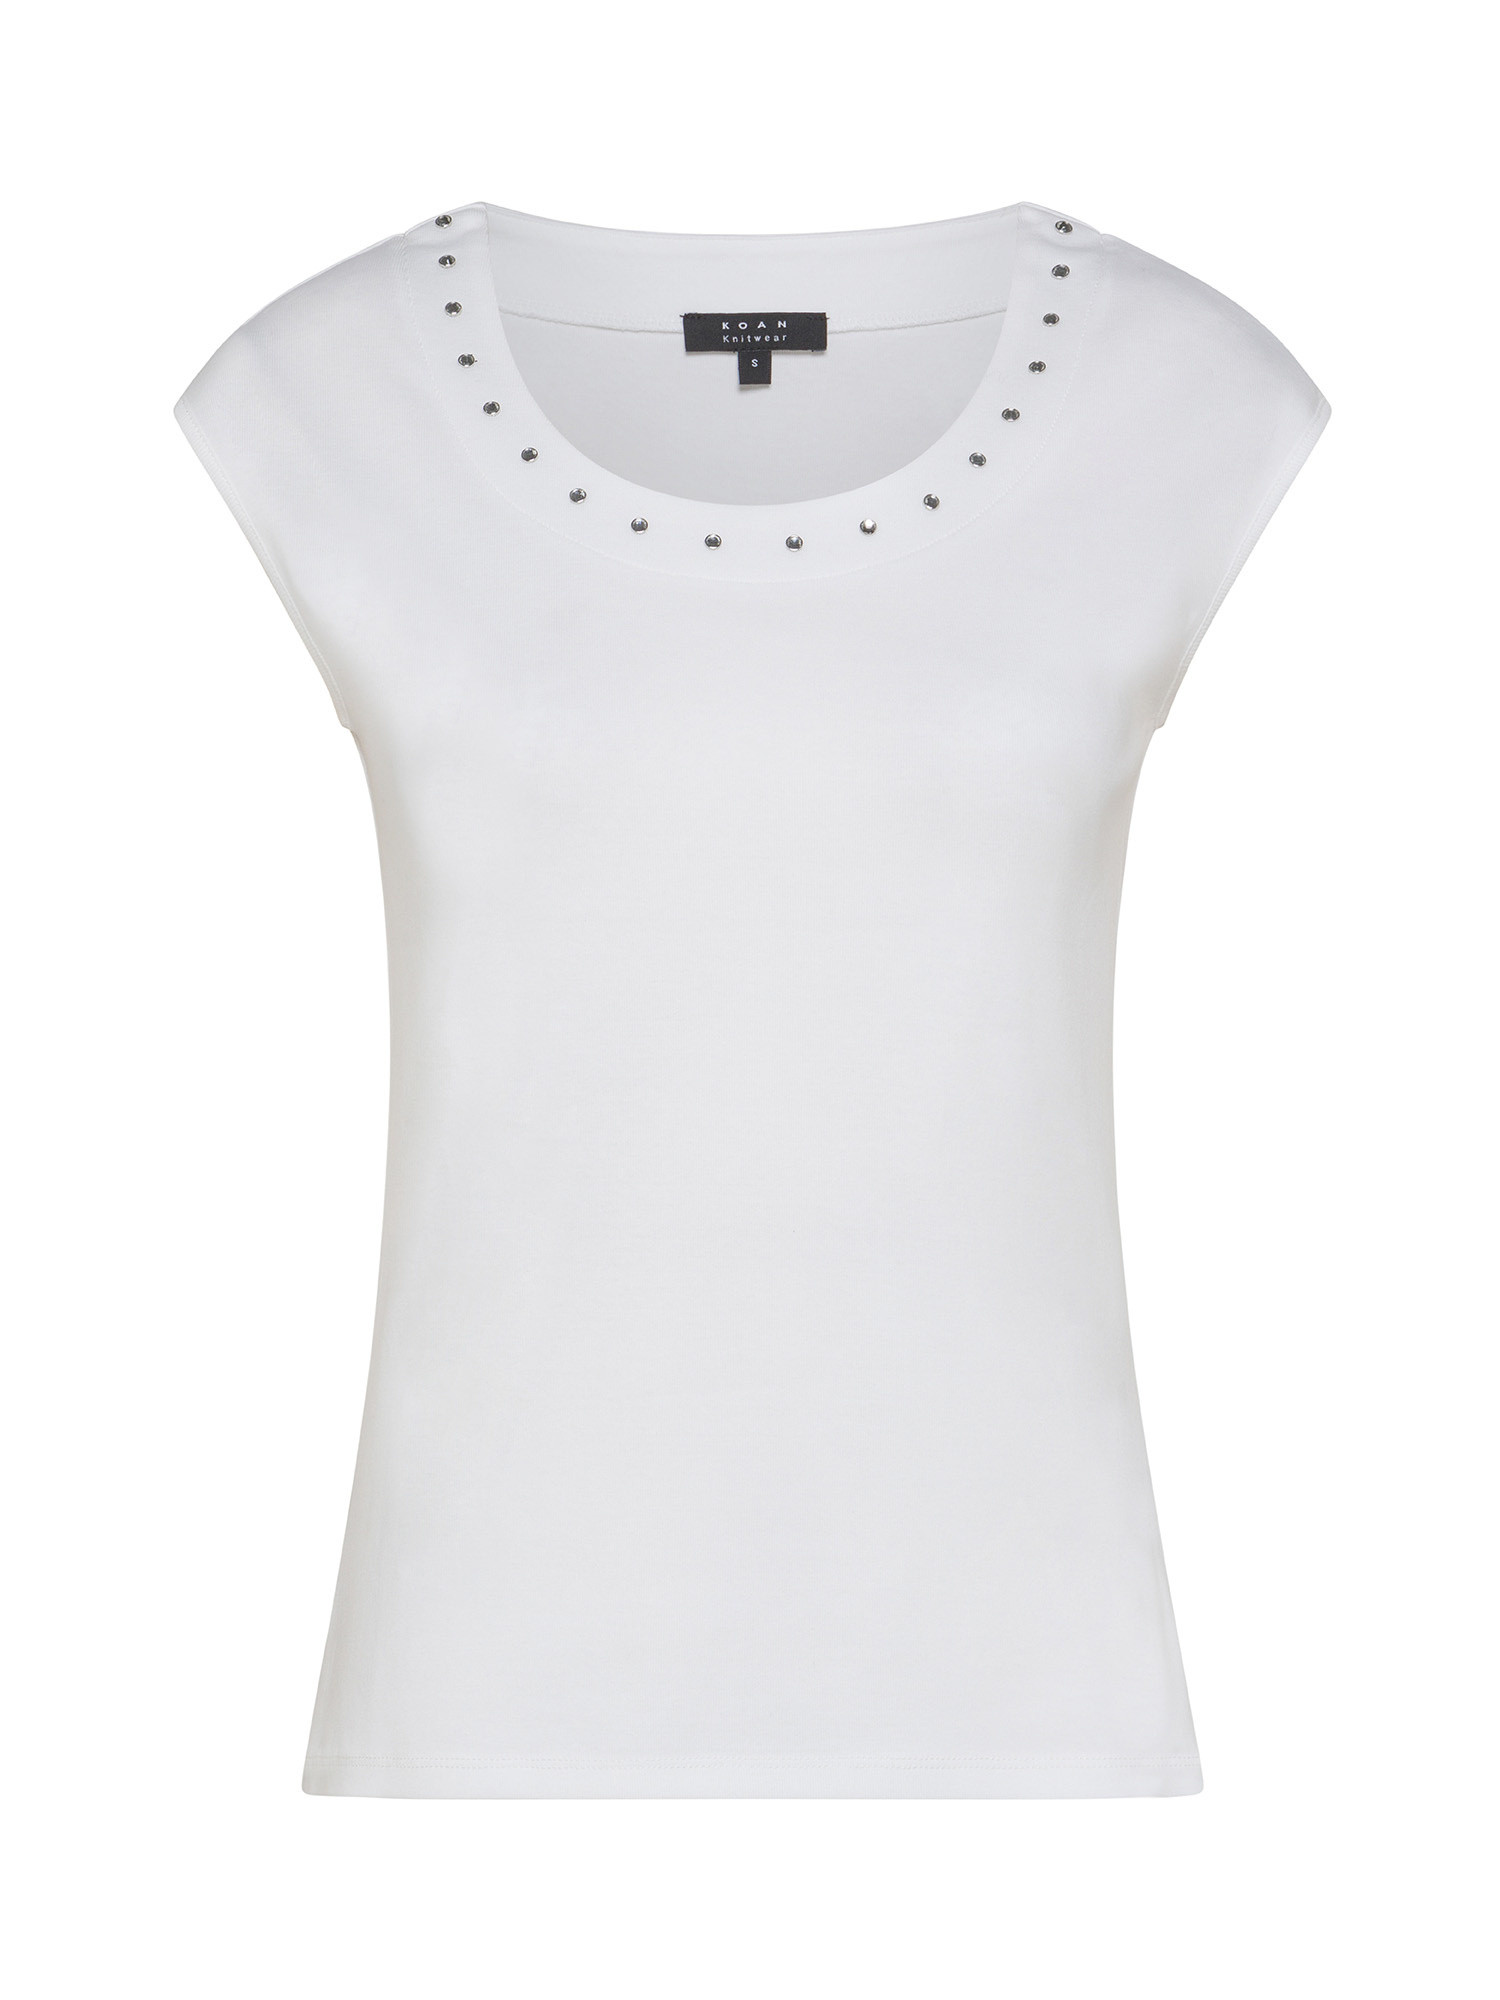 Koan - Cotton T-shirt with studs, White, large image number 0